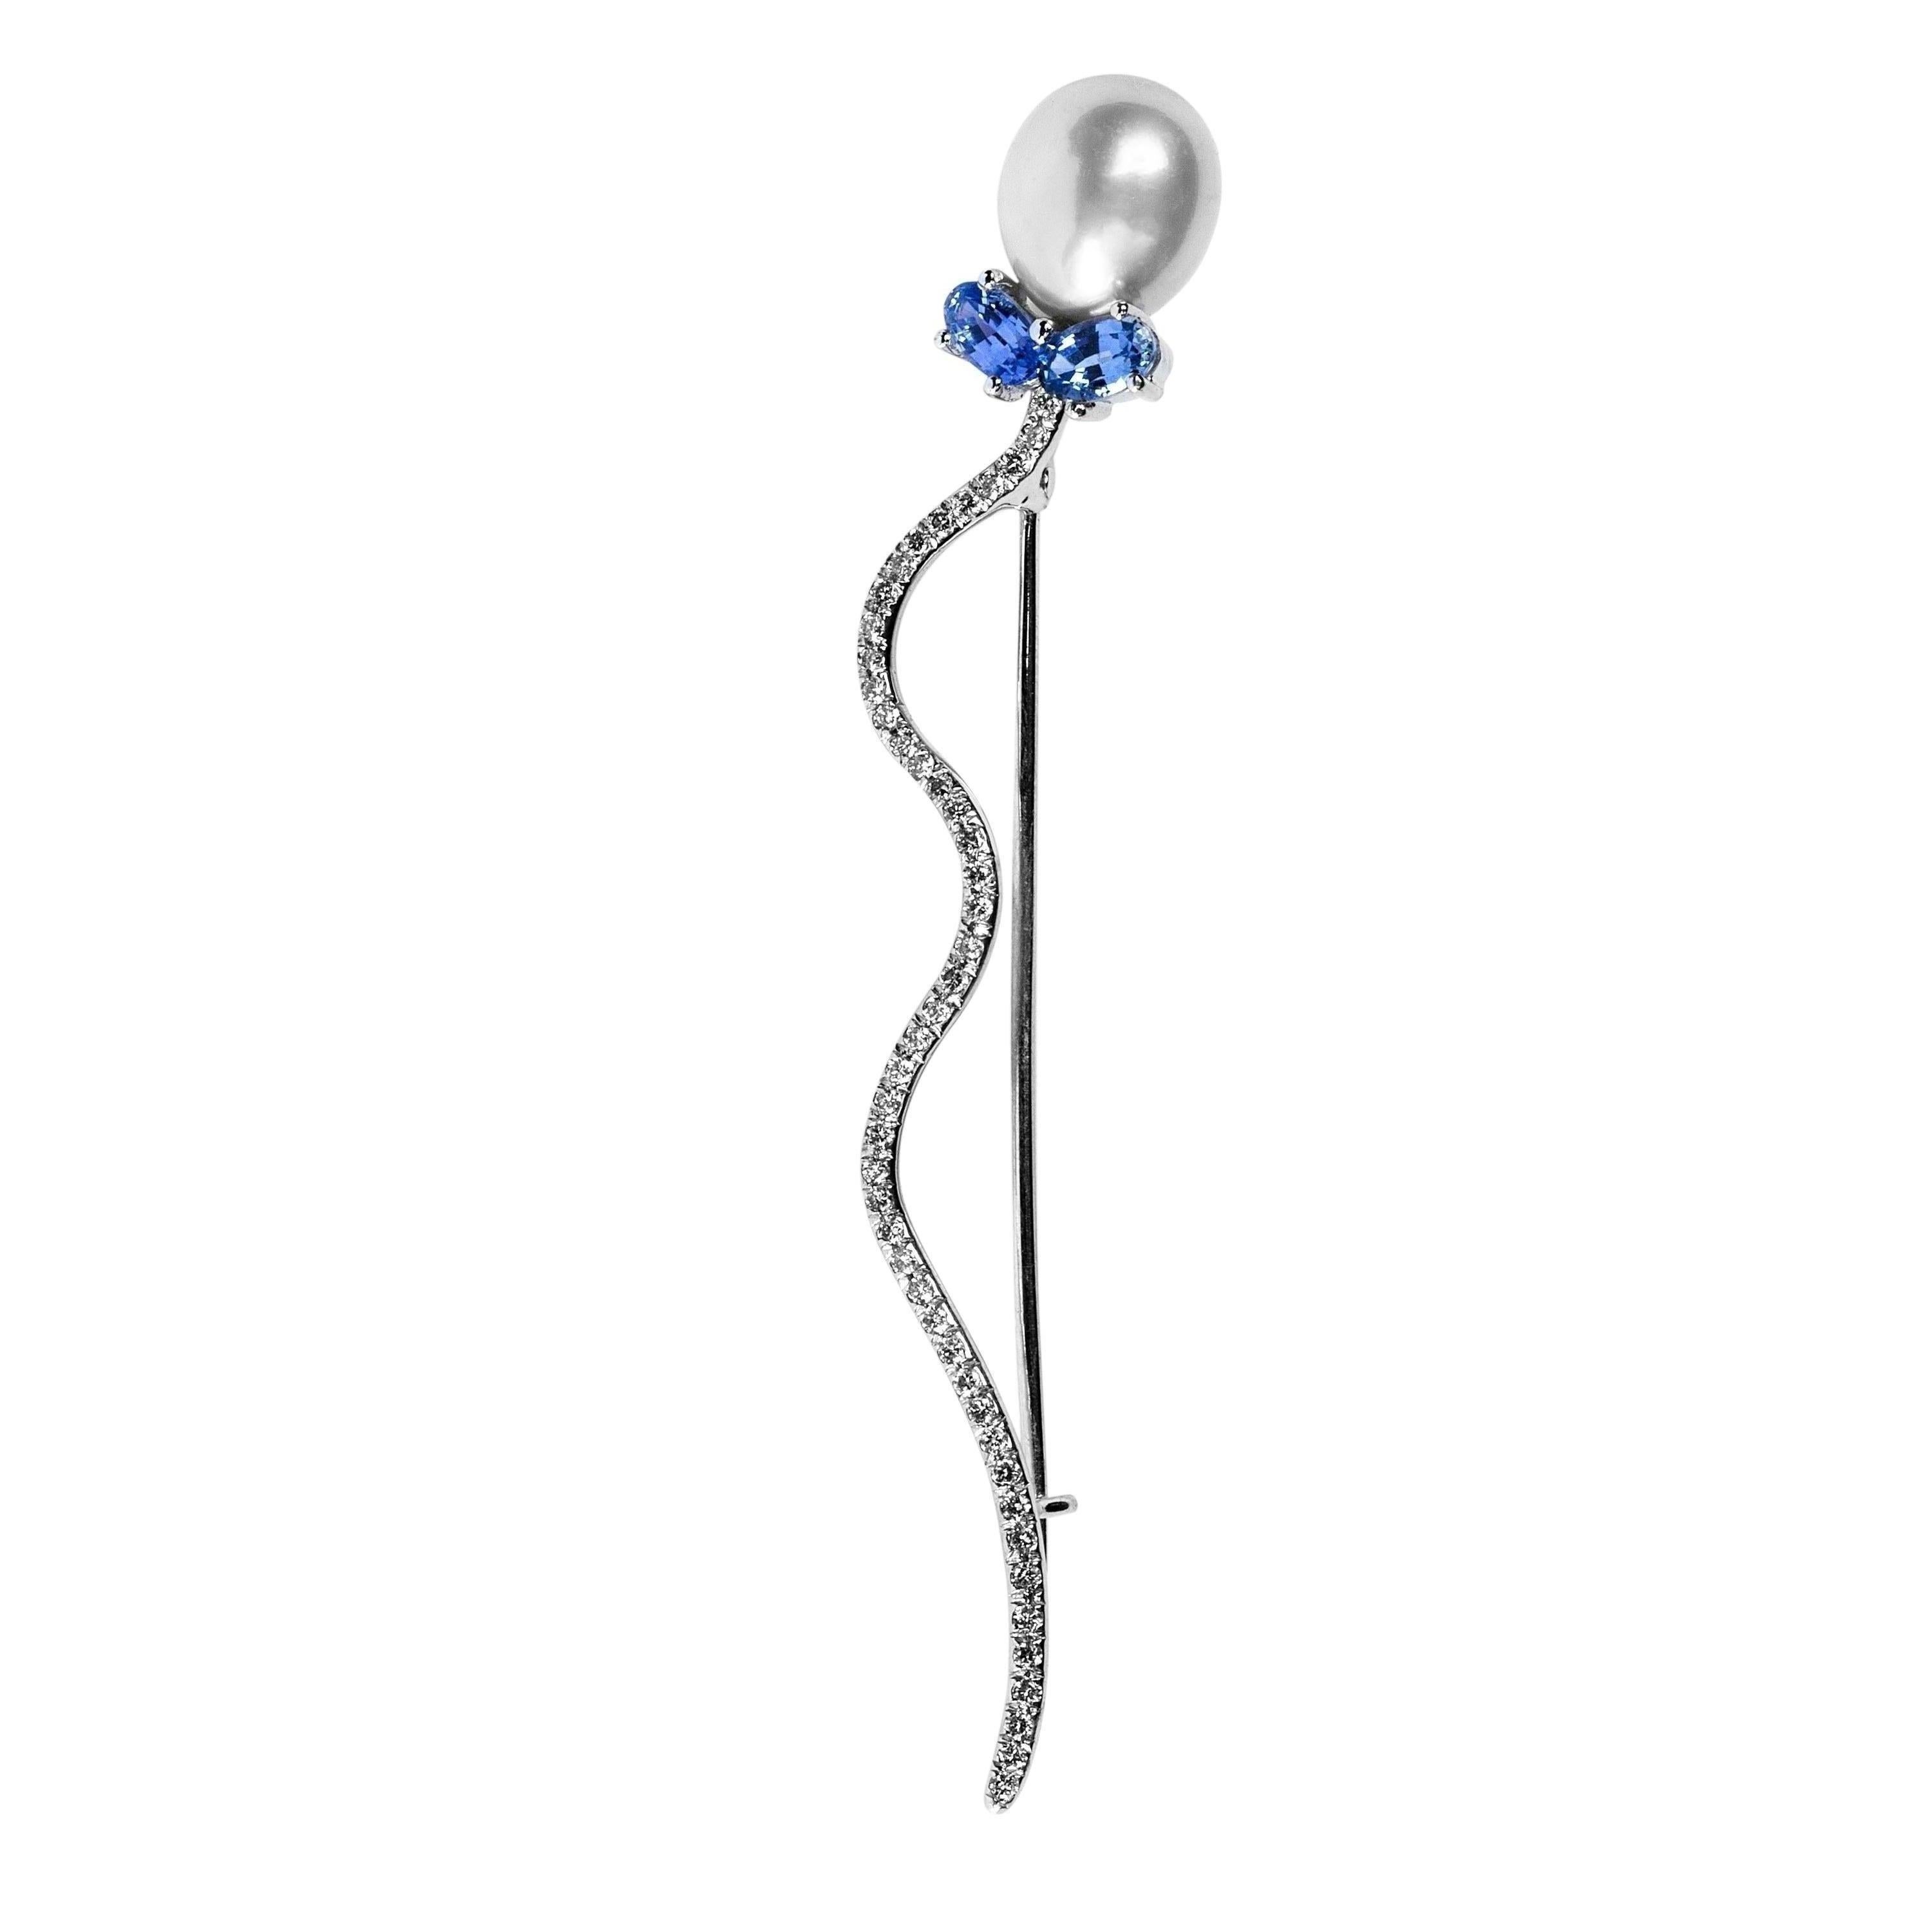 Jona design collection,  hand crafted in Italy, 18 karat white gold balloon shape brooch, featuring  0.67 carats of blue sapphires and 0.26 carats of white diamonds. An oval shape white pearl as balloon.  
All Jona jewelry is new and has never been